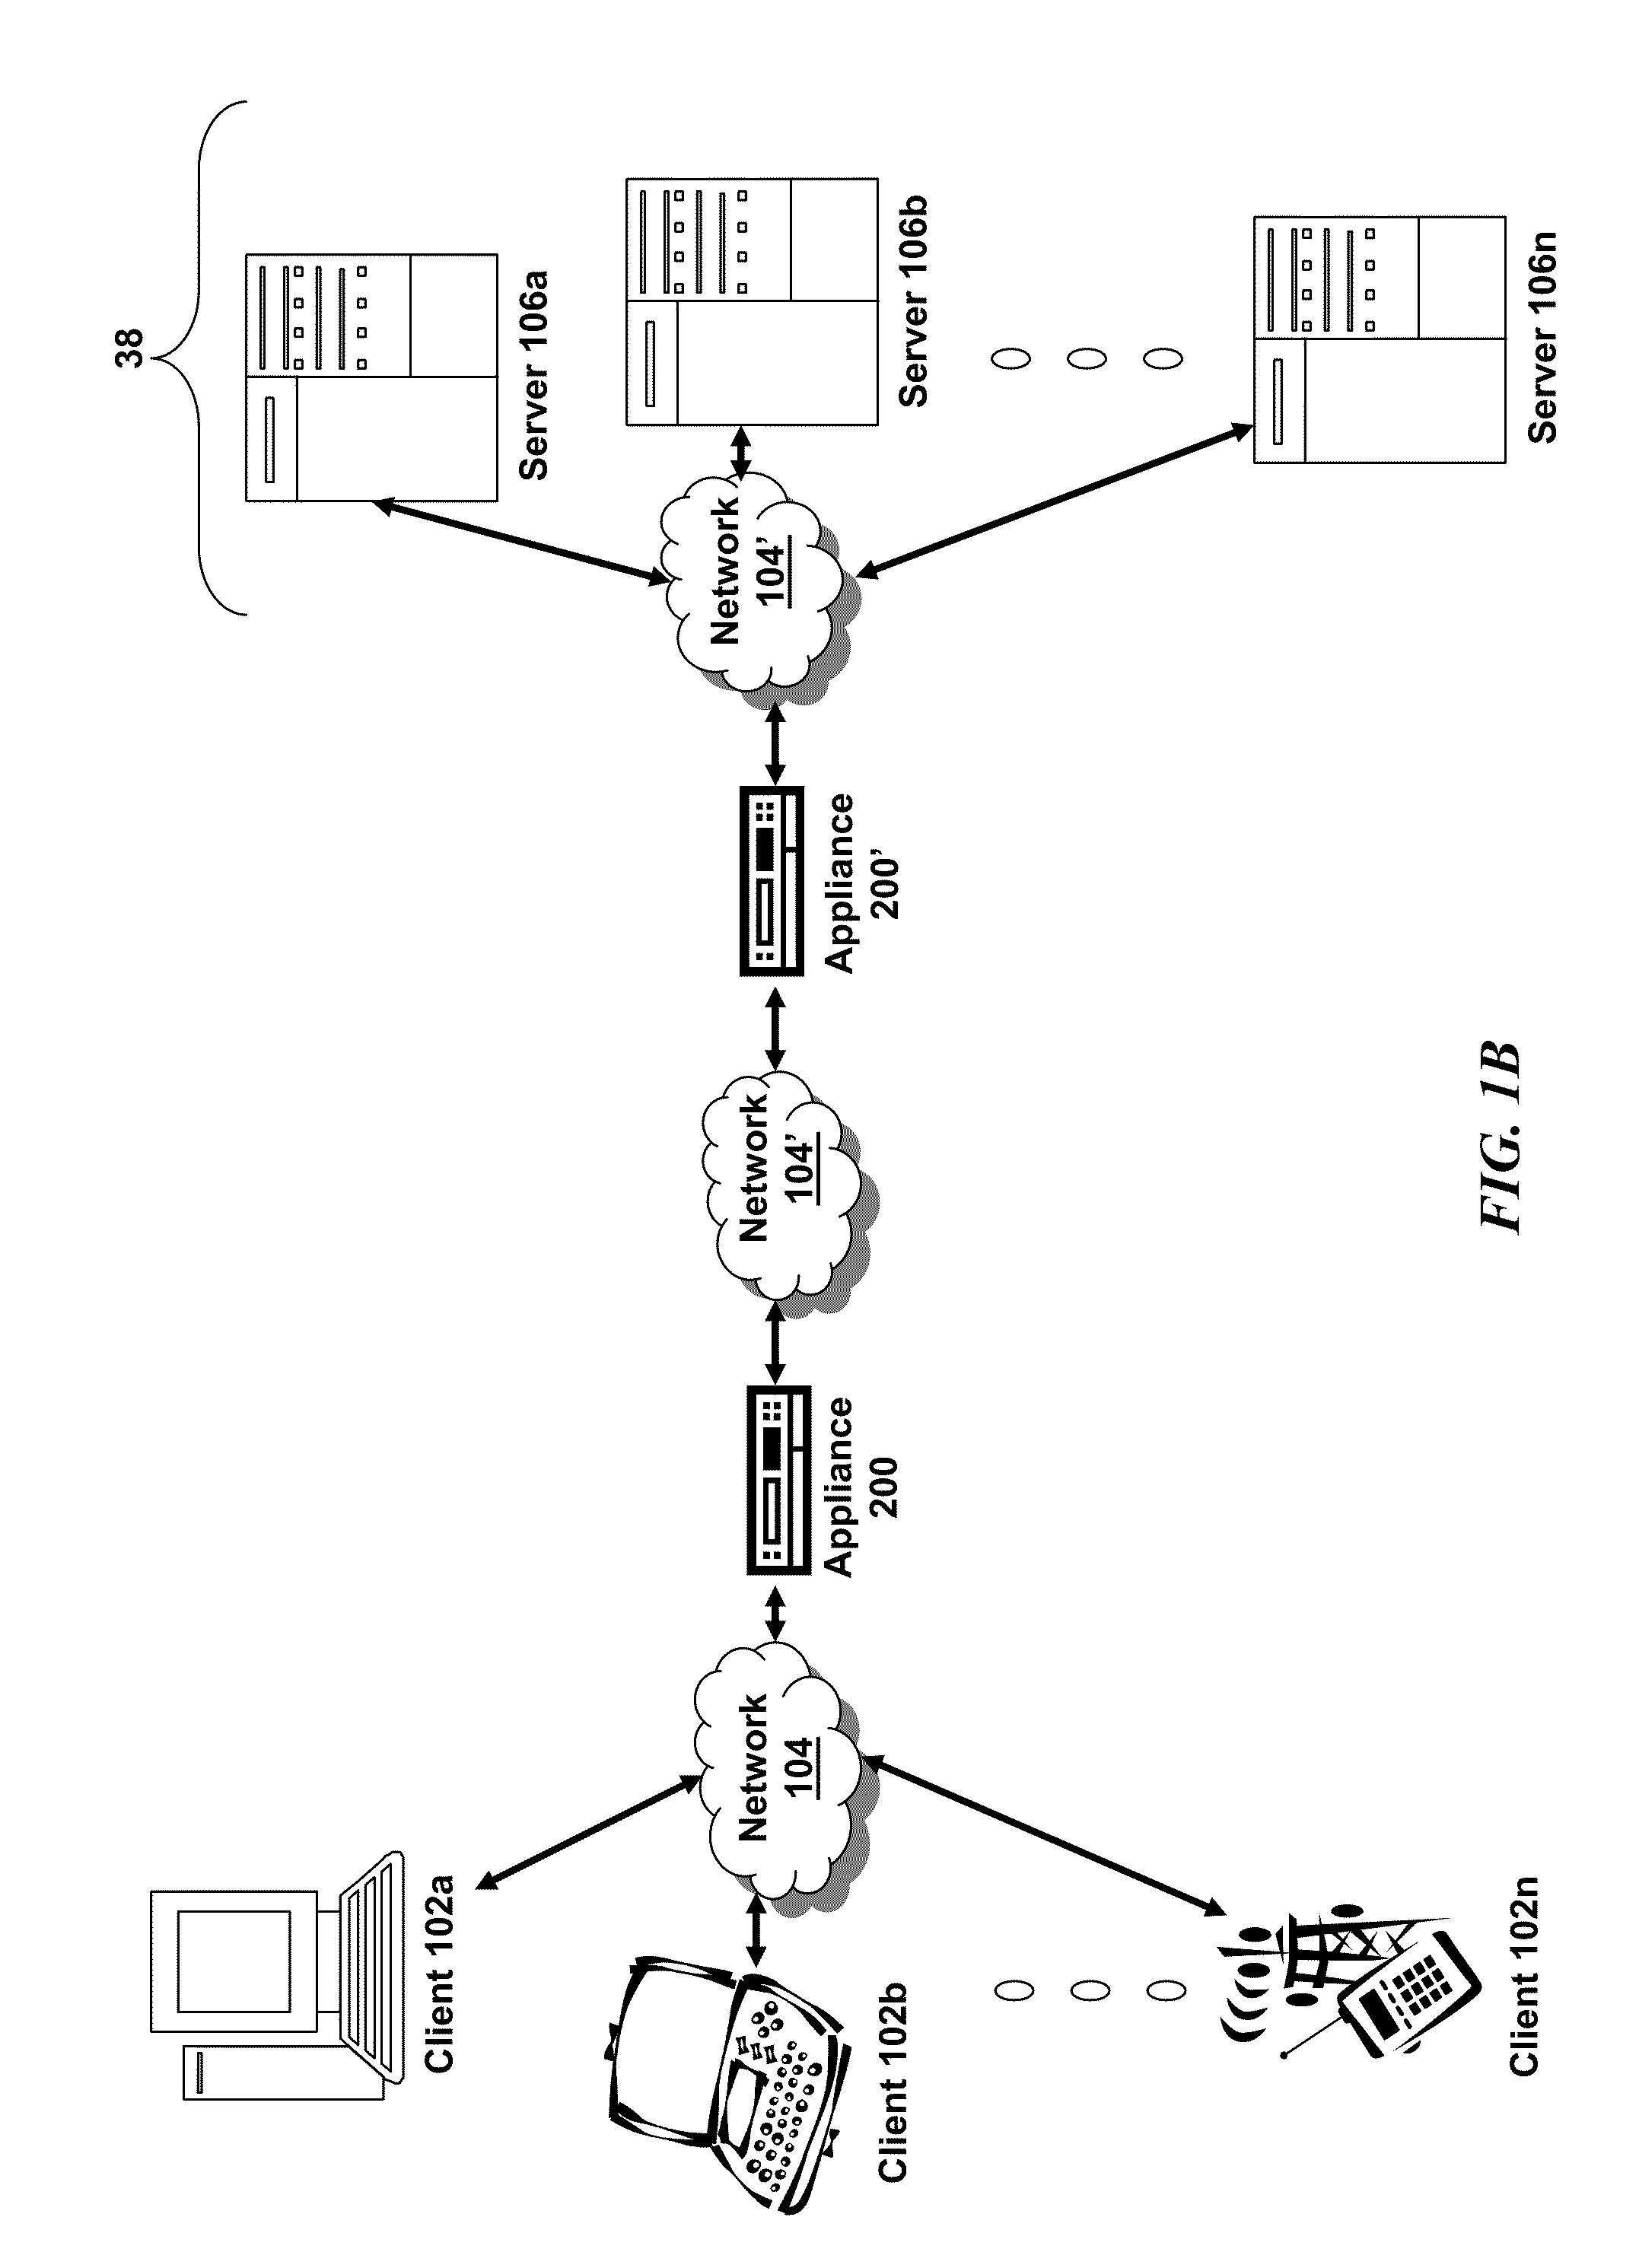 Systems and methods for database notification interface to efficiently identify events and changed data